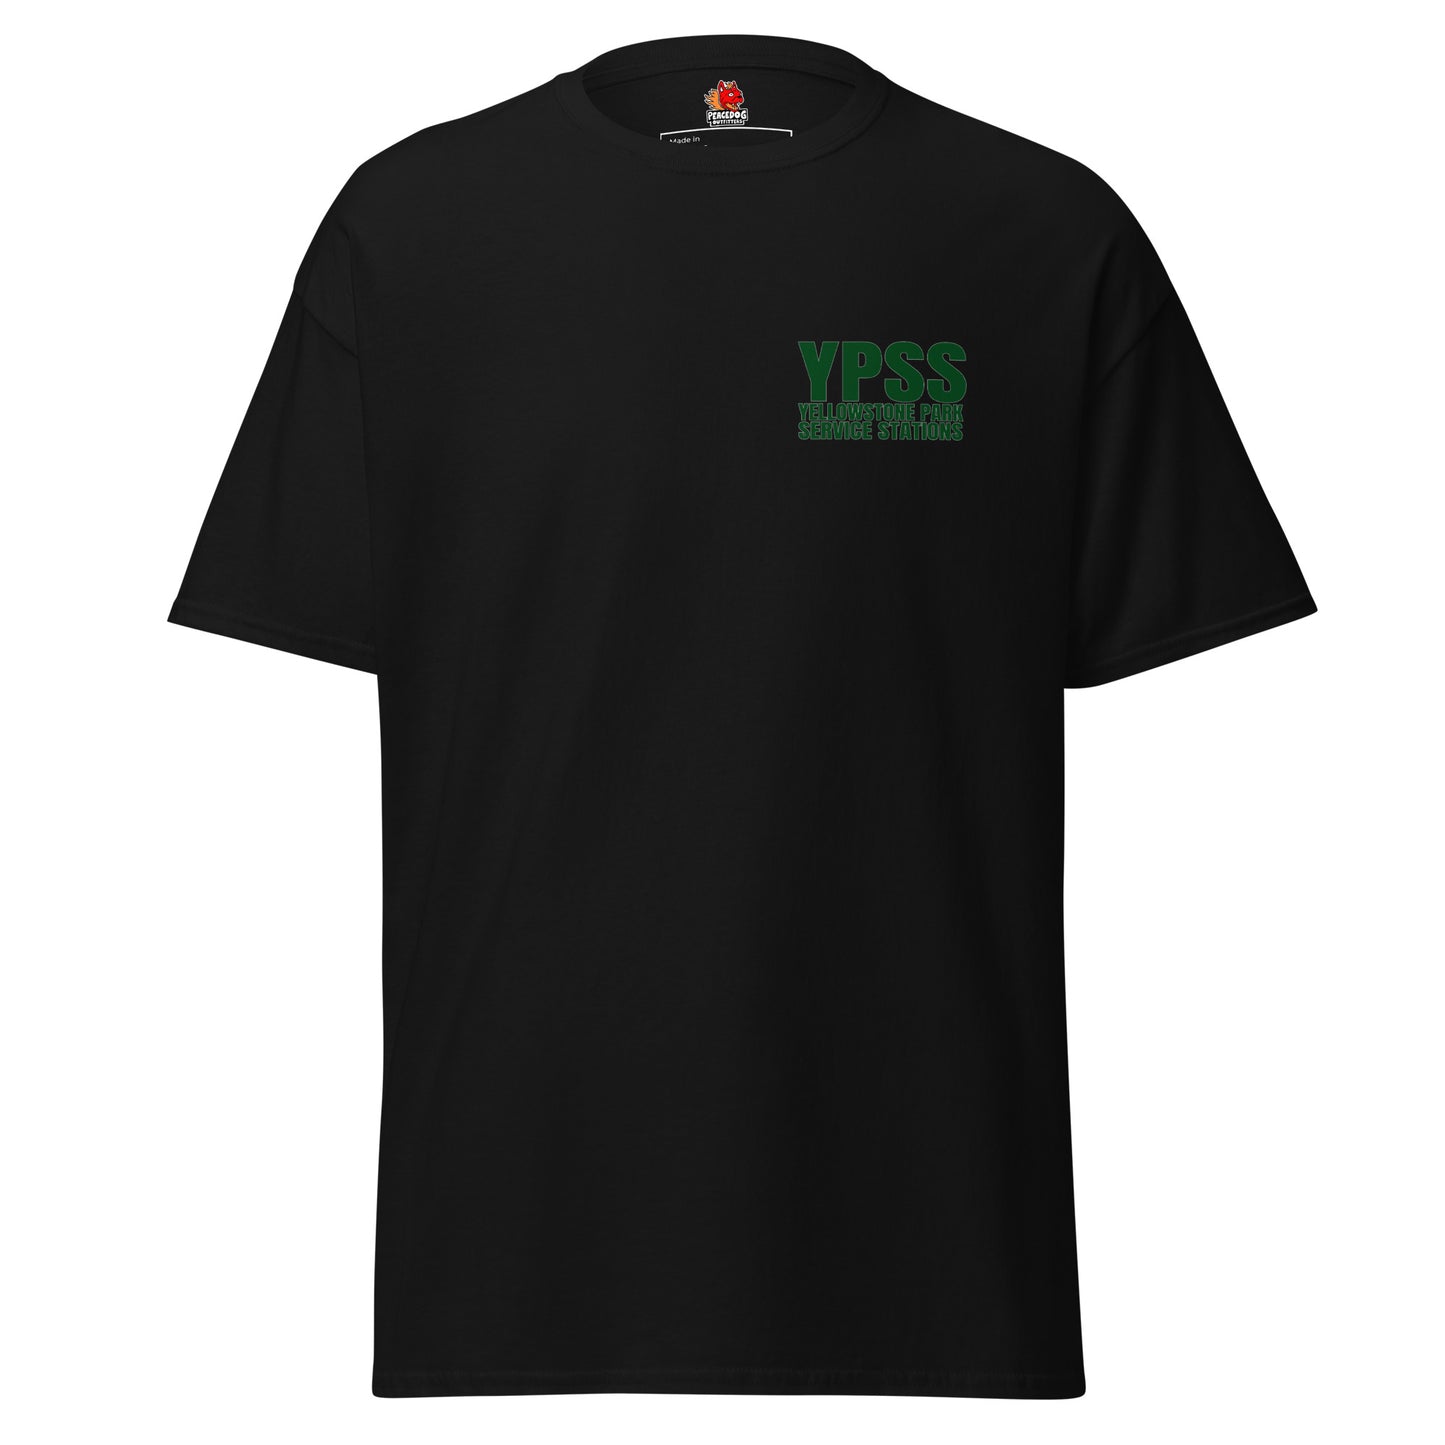 YPSS Yellowstone Park Service Stations - West Thumb Station - Classic Tee